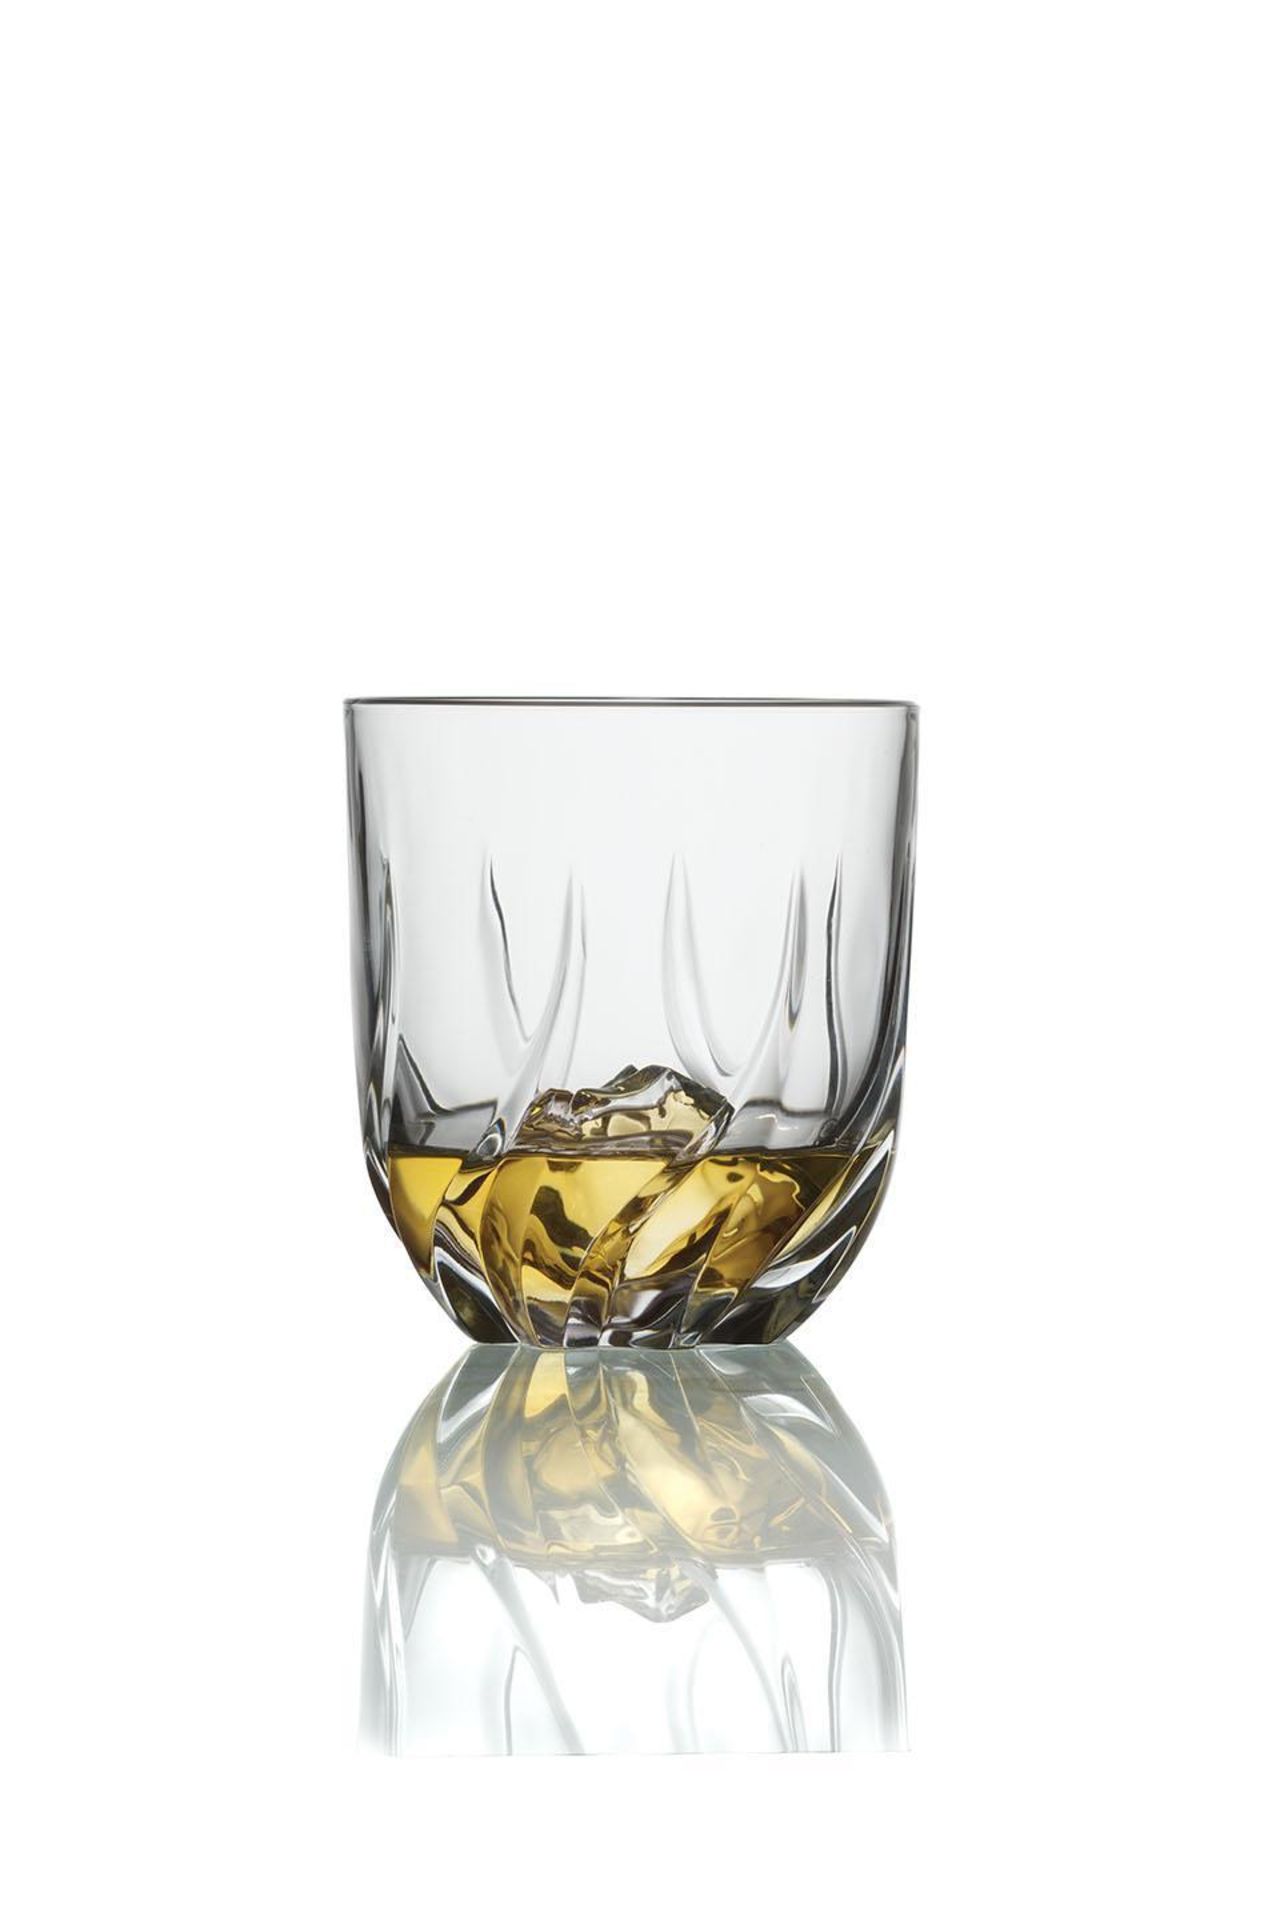 V *TRADE QTY* Brand New RCR Twist Whiskey Glasses 33cl - Made In Italy X 10 YOUR BID PRICE TO BE